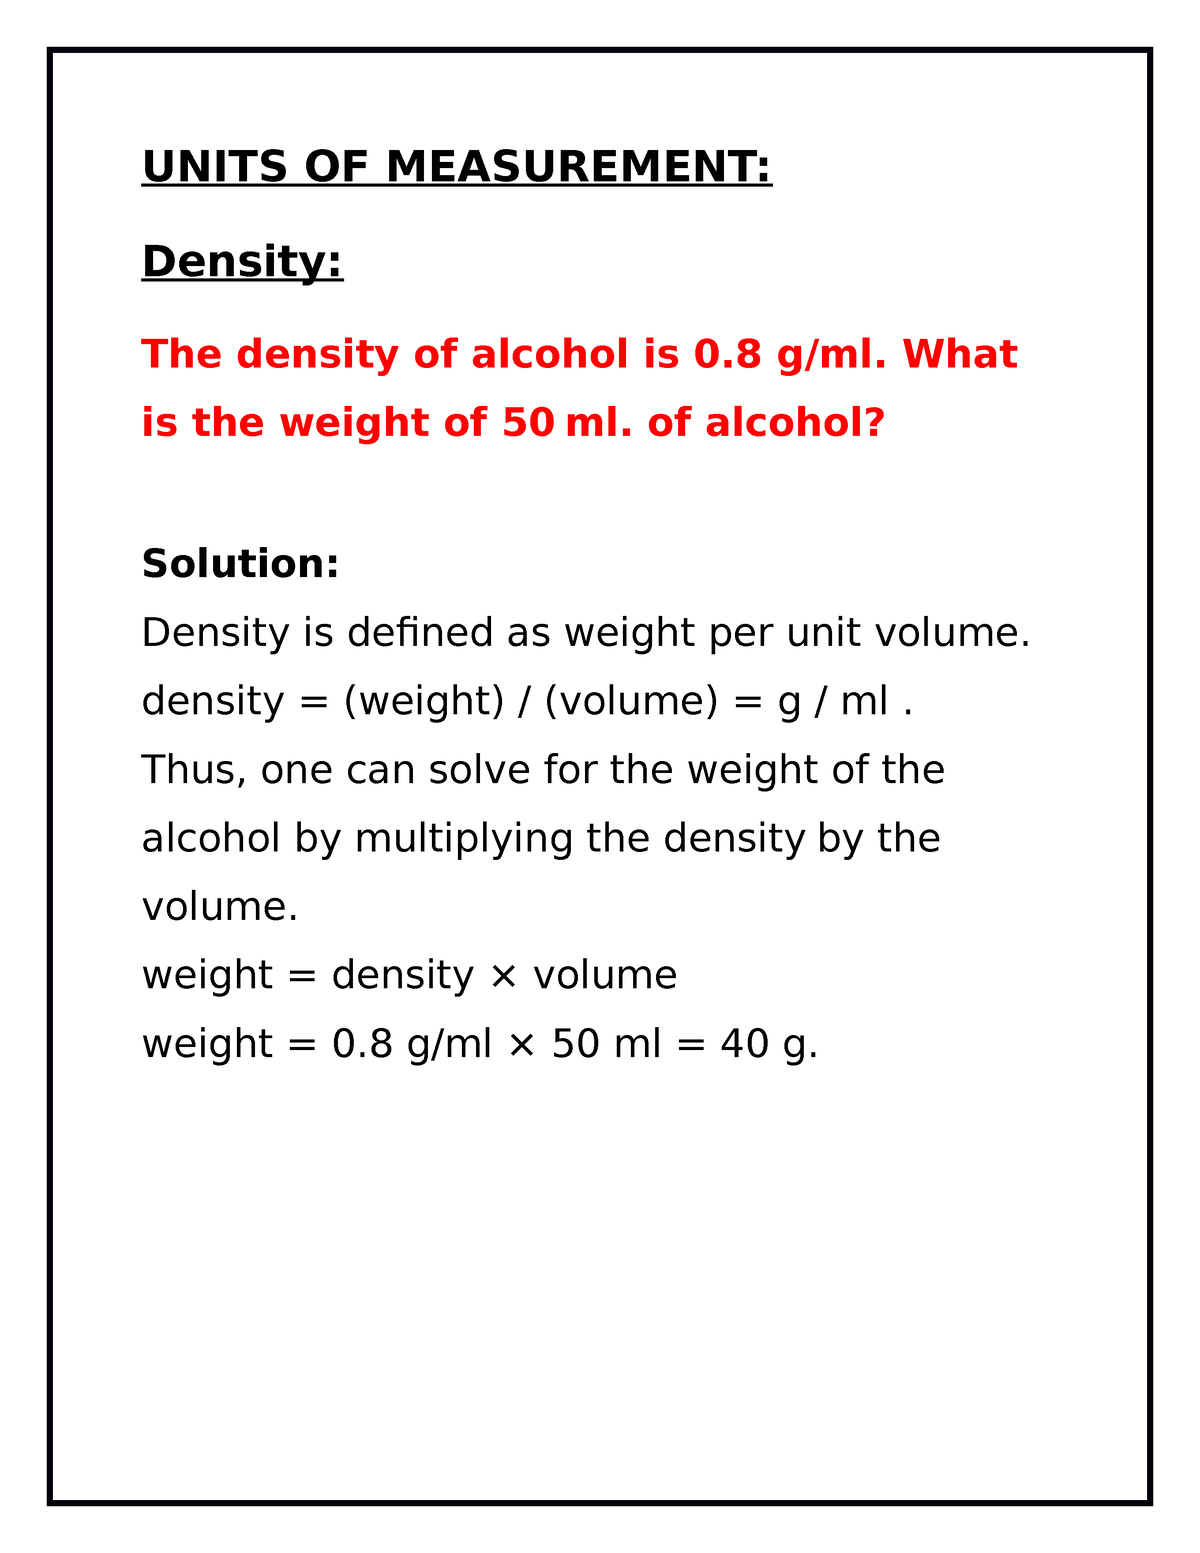 density of alcohol